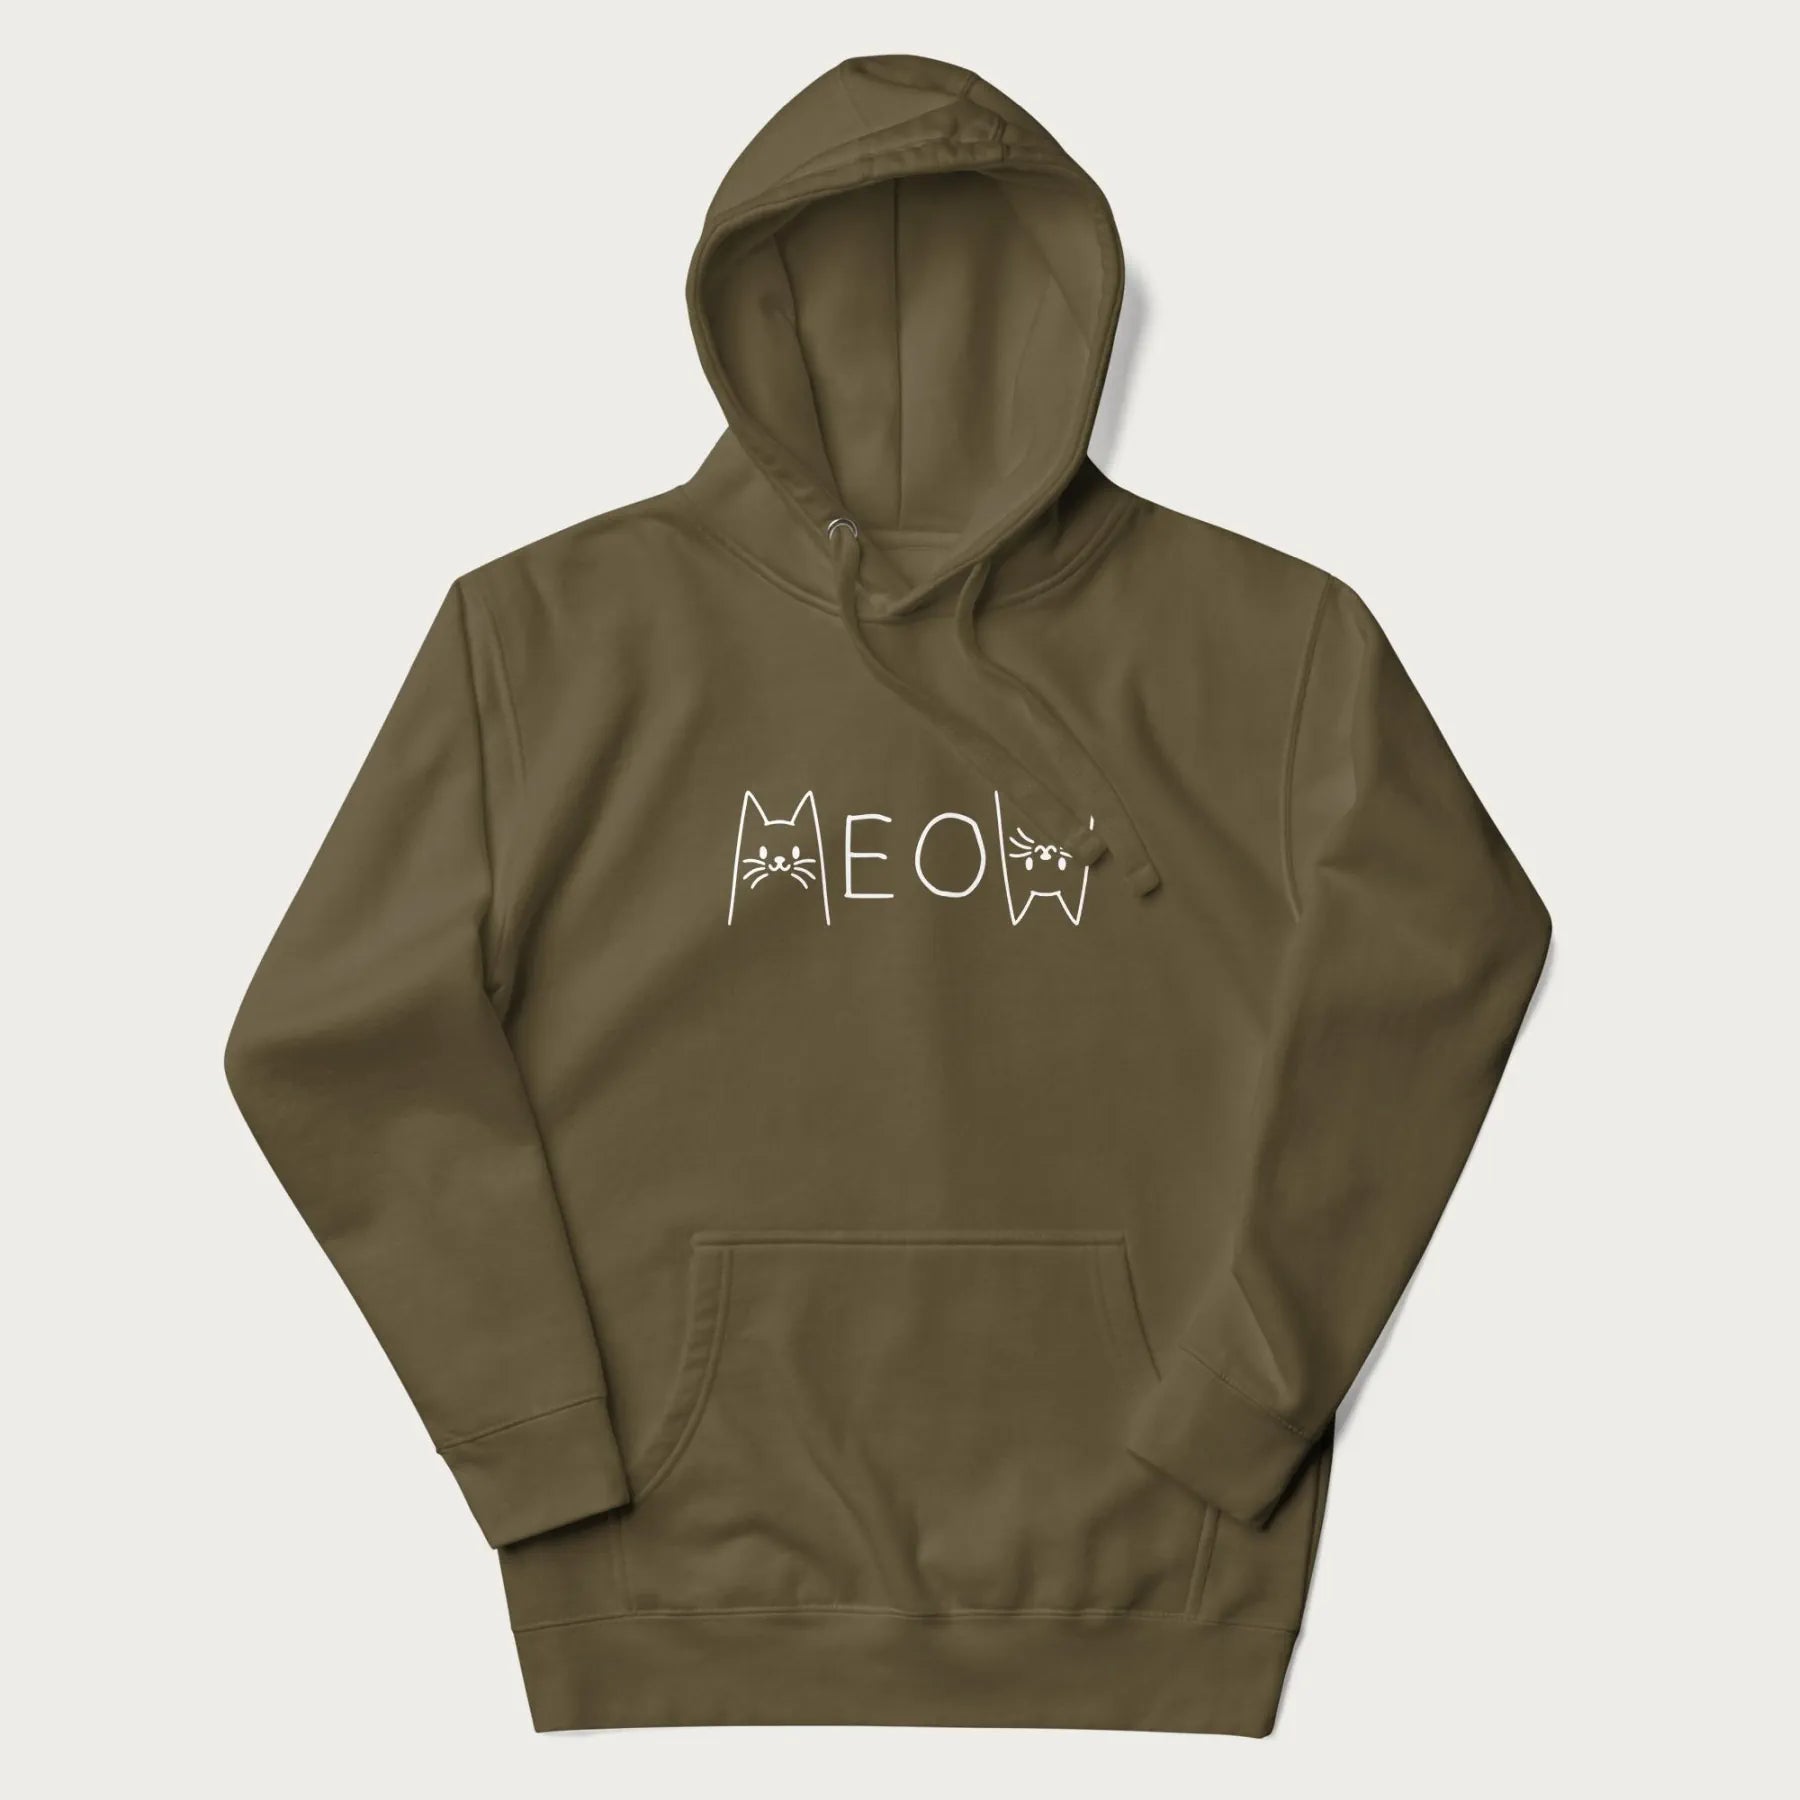 Military green meow hoodie with a simple 'MEOW' text and cute cat face graphics on the front.